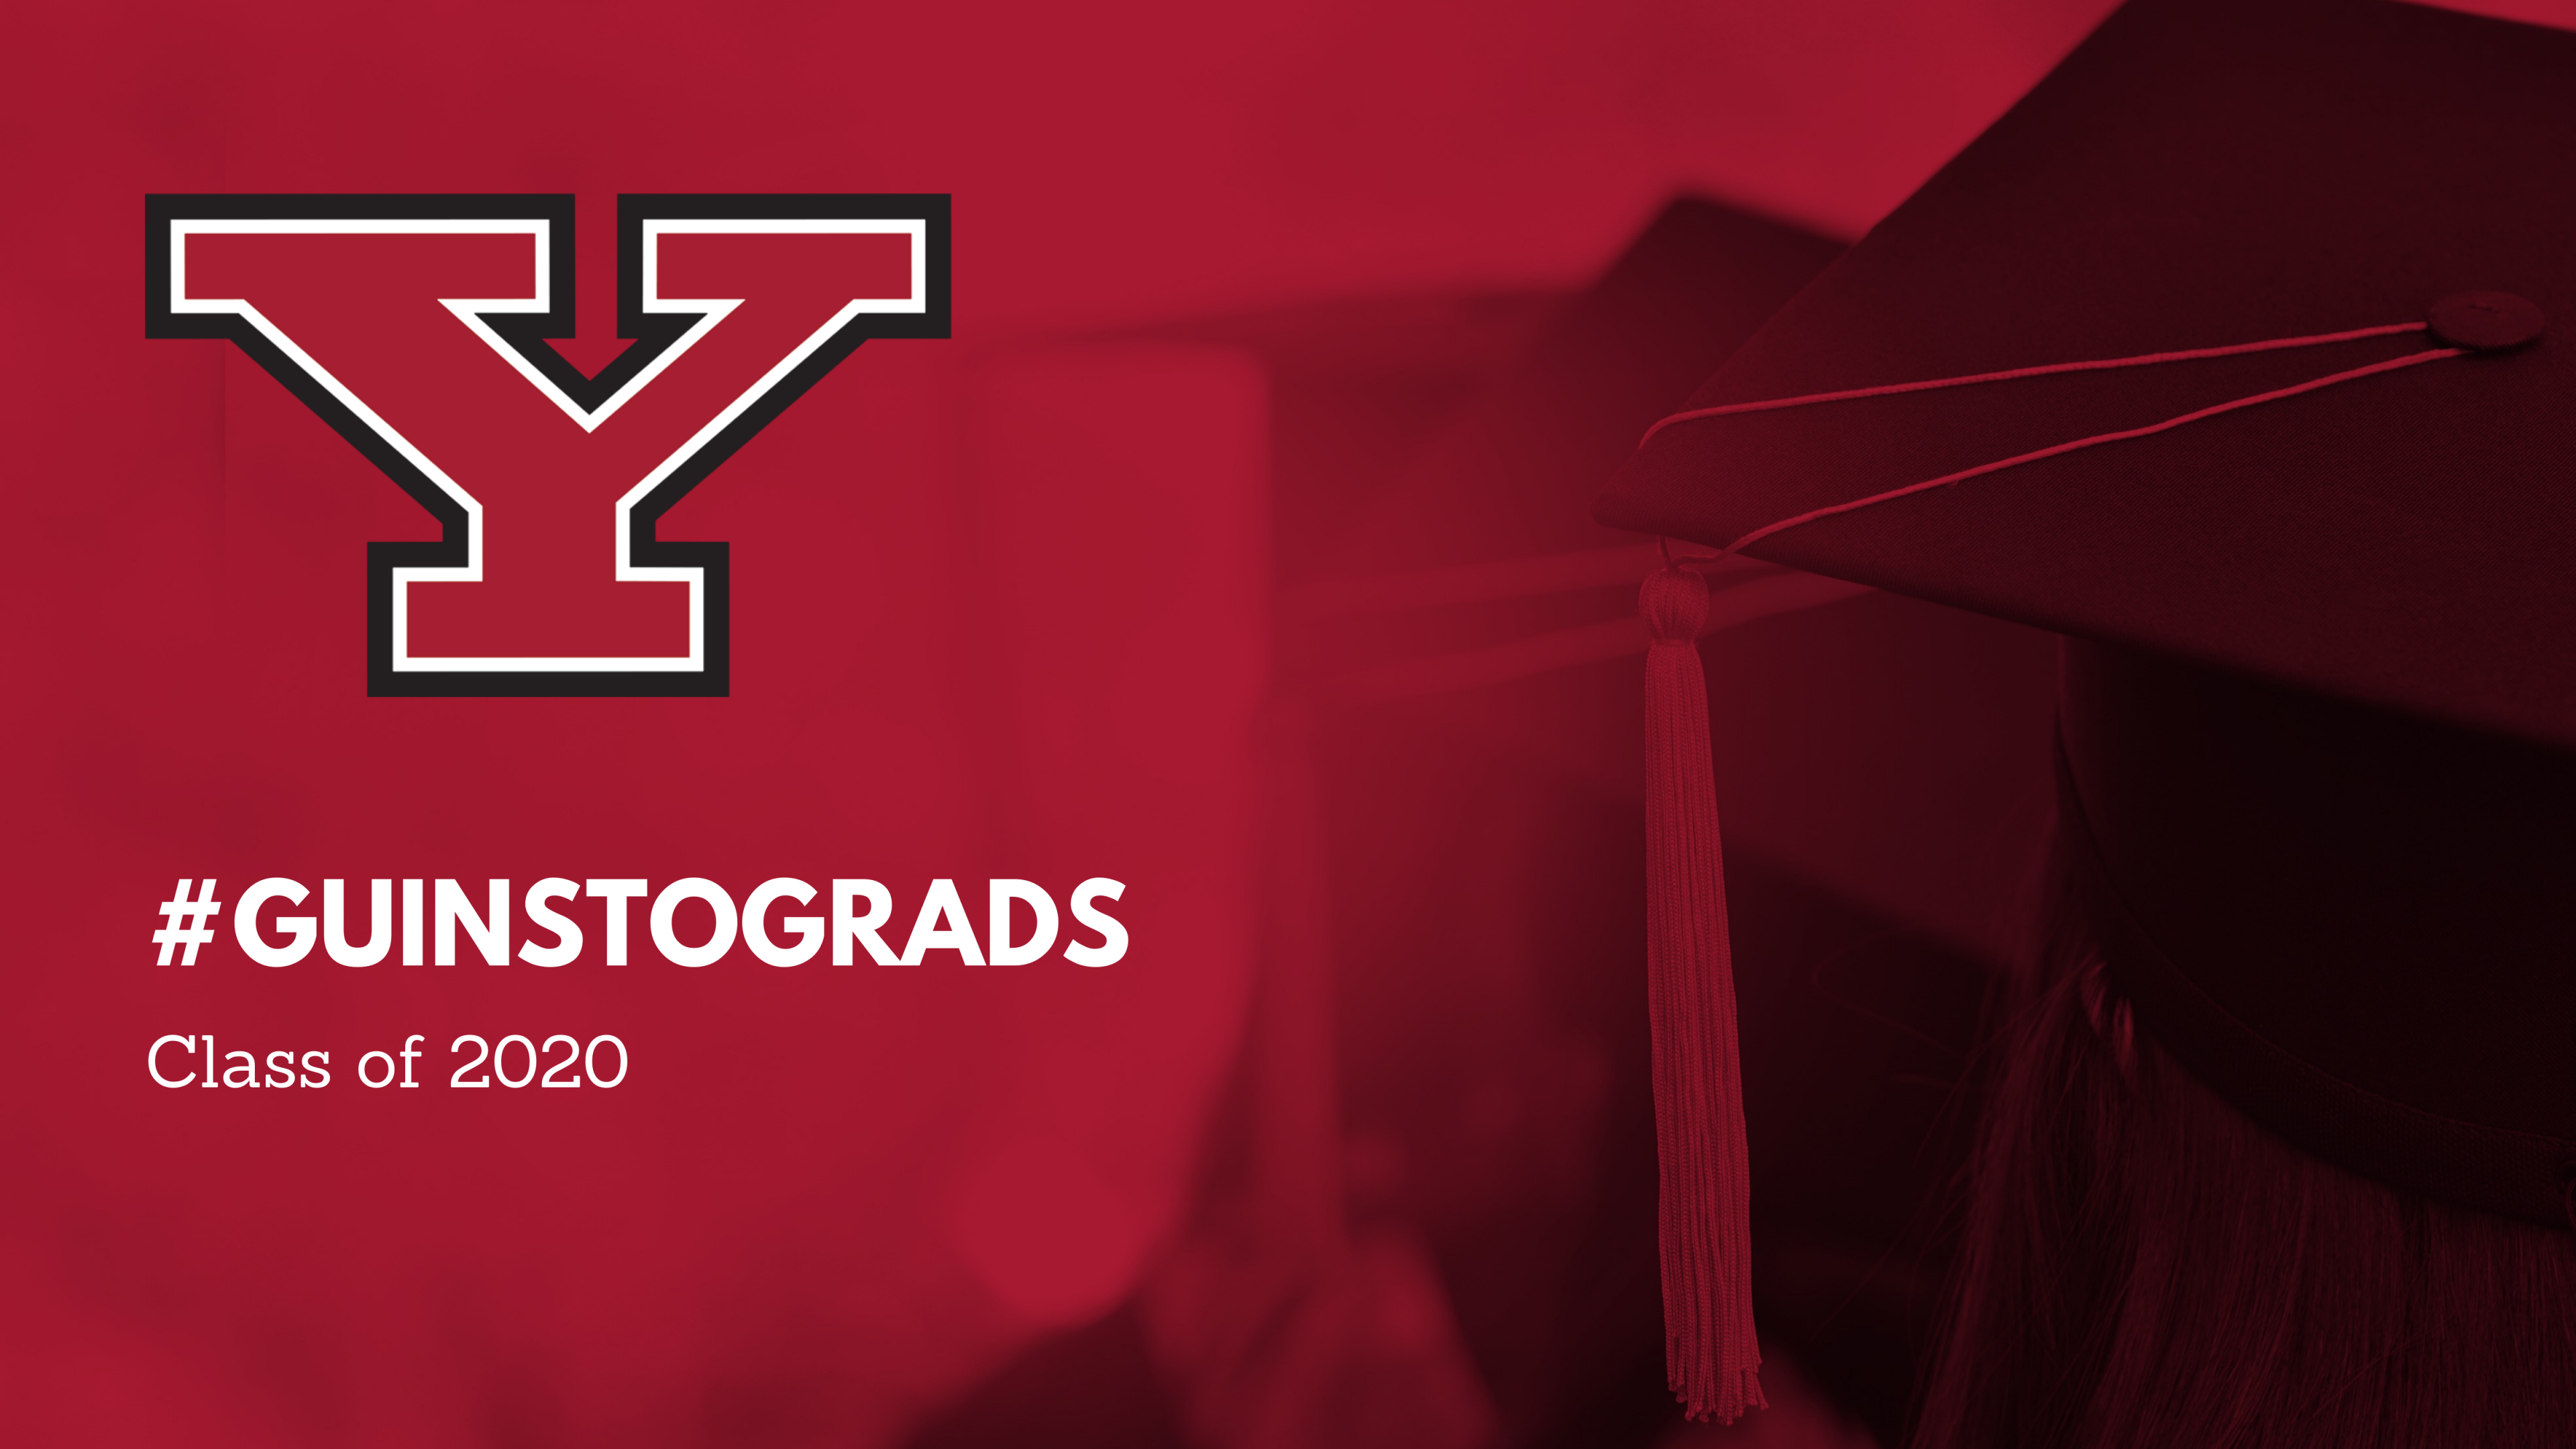 A red photo of a graduation cap with text "Class of 2020"